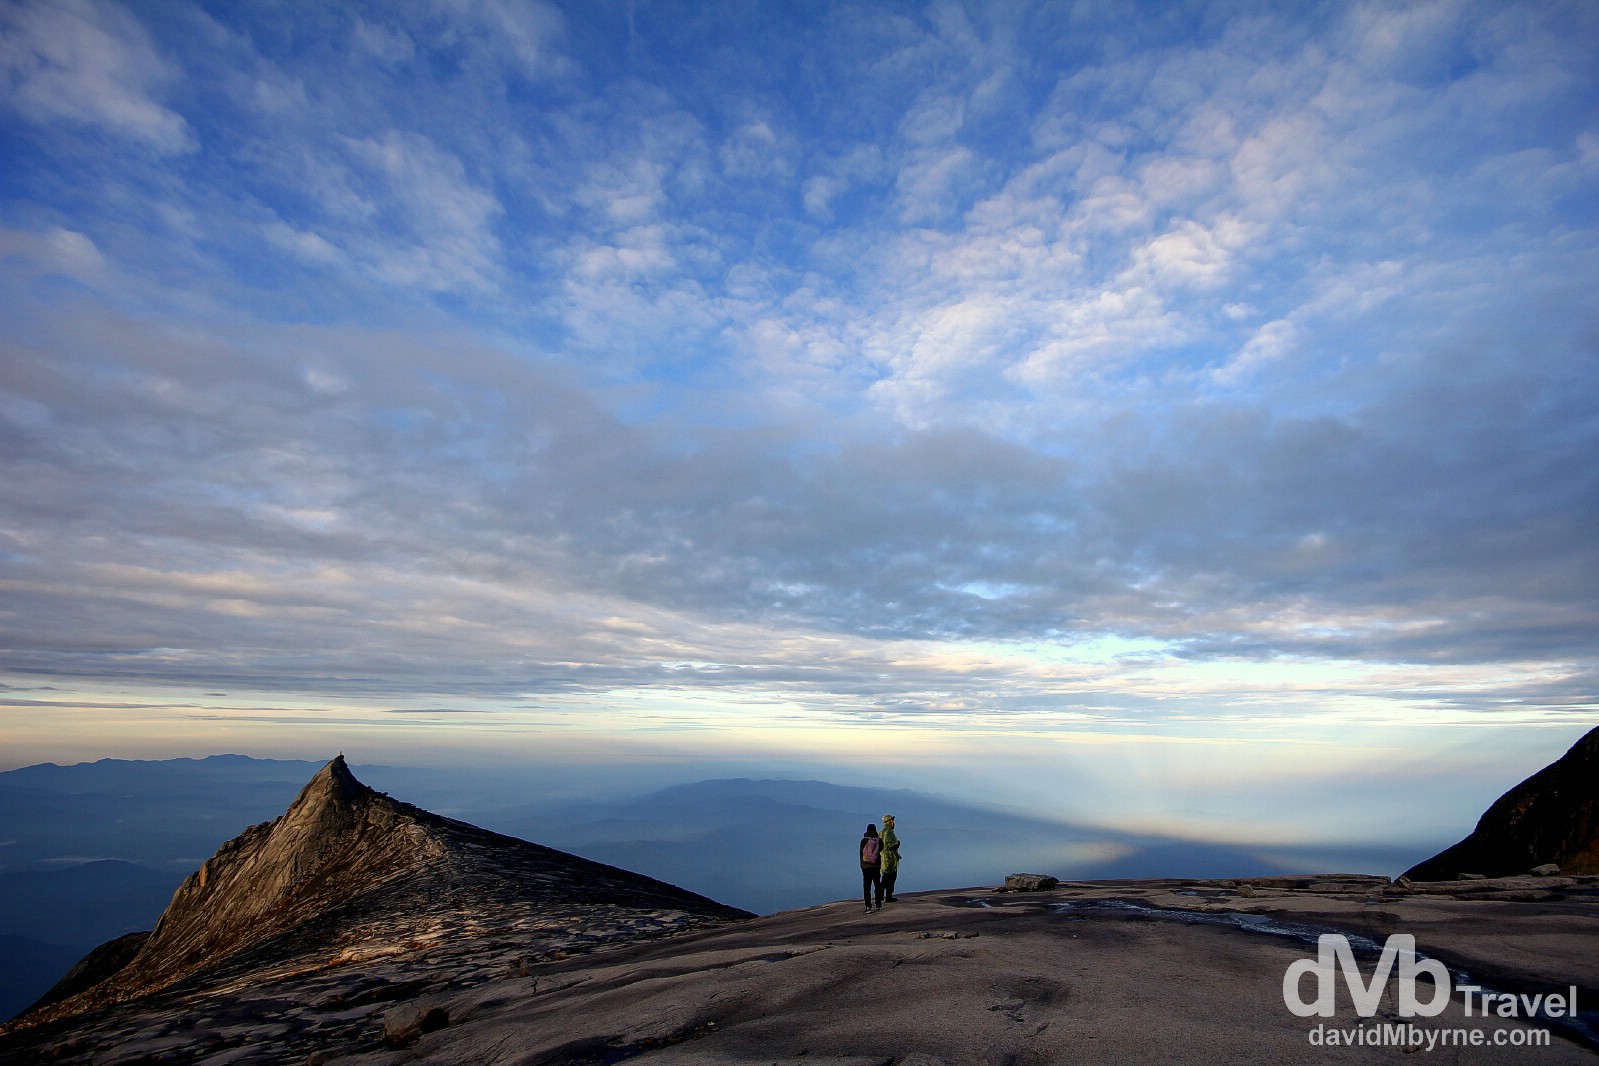 A picture captured on the descent of climbers admiring the post sunrise view over Sabah, Malaysian Borneo, from the granite expanse leading to the summit of Mount Kinabalu. The views of Sabah from this height, stretching out below in all directions, are phenomenal. June 23rd 2012.